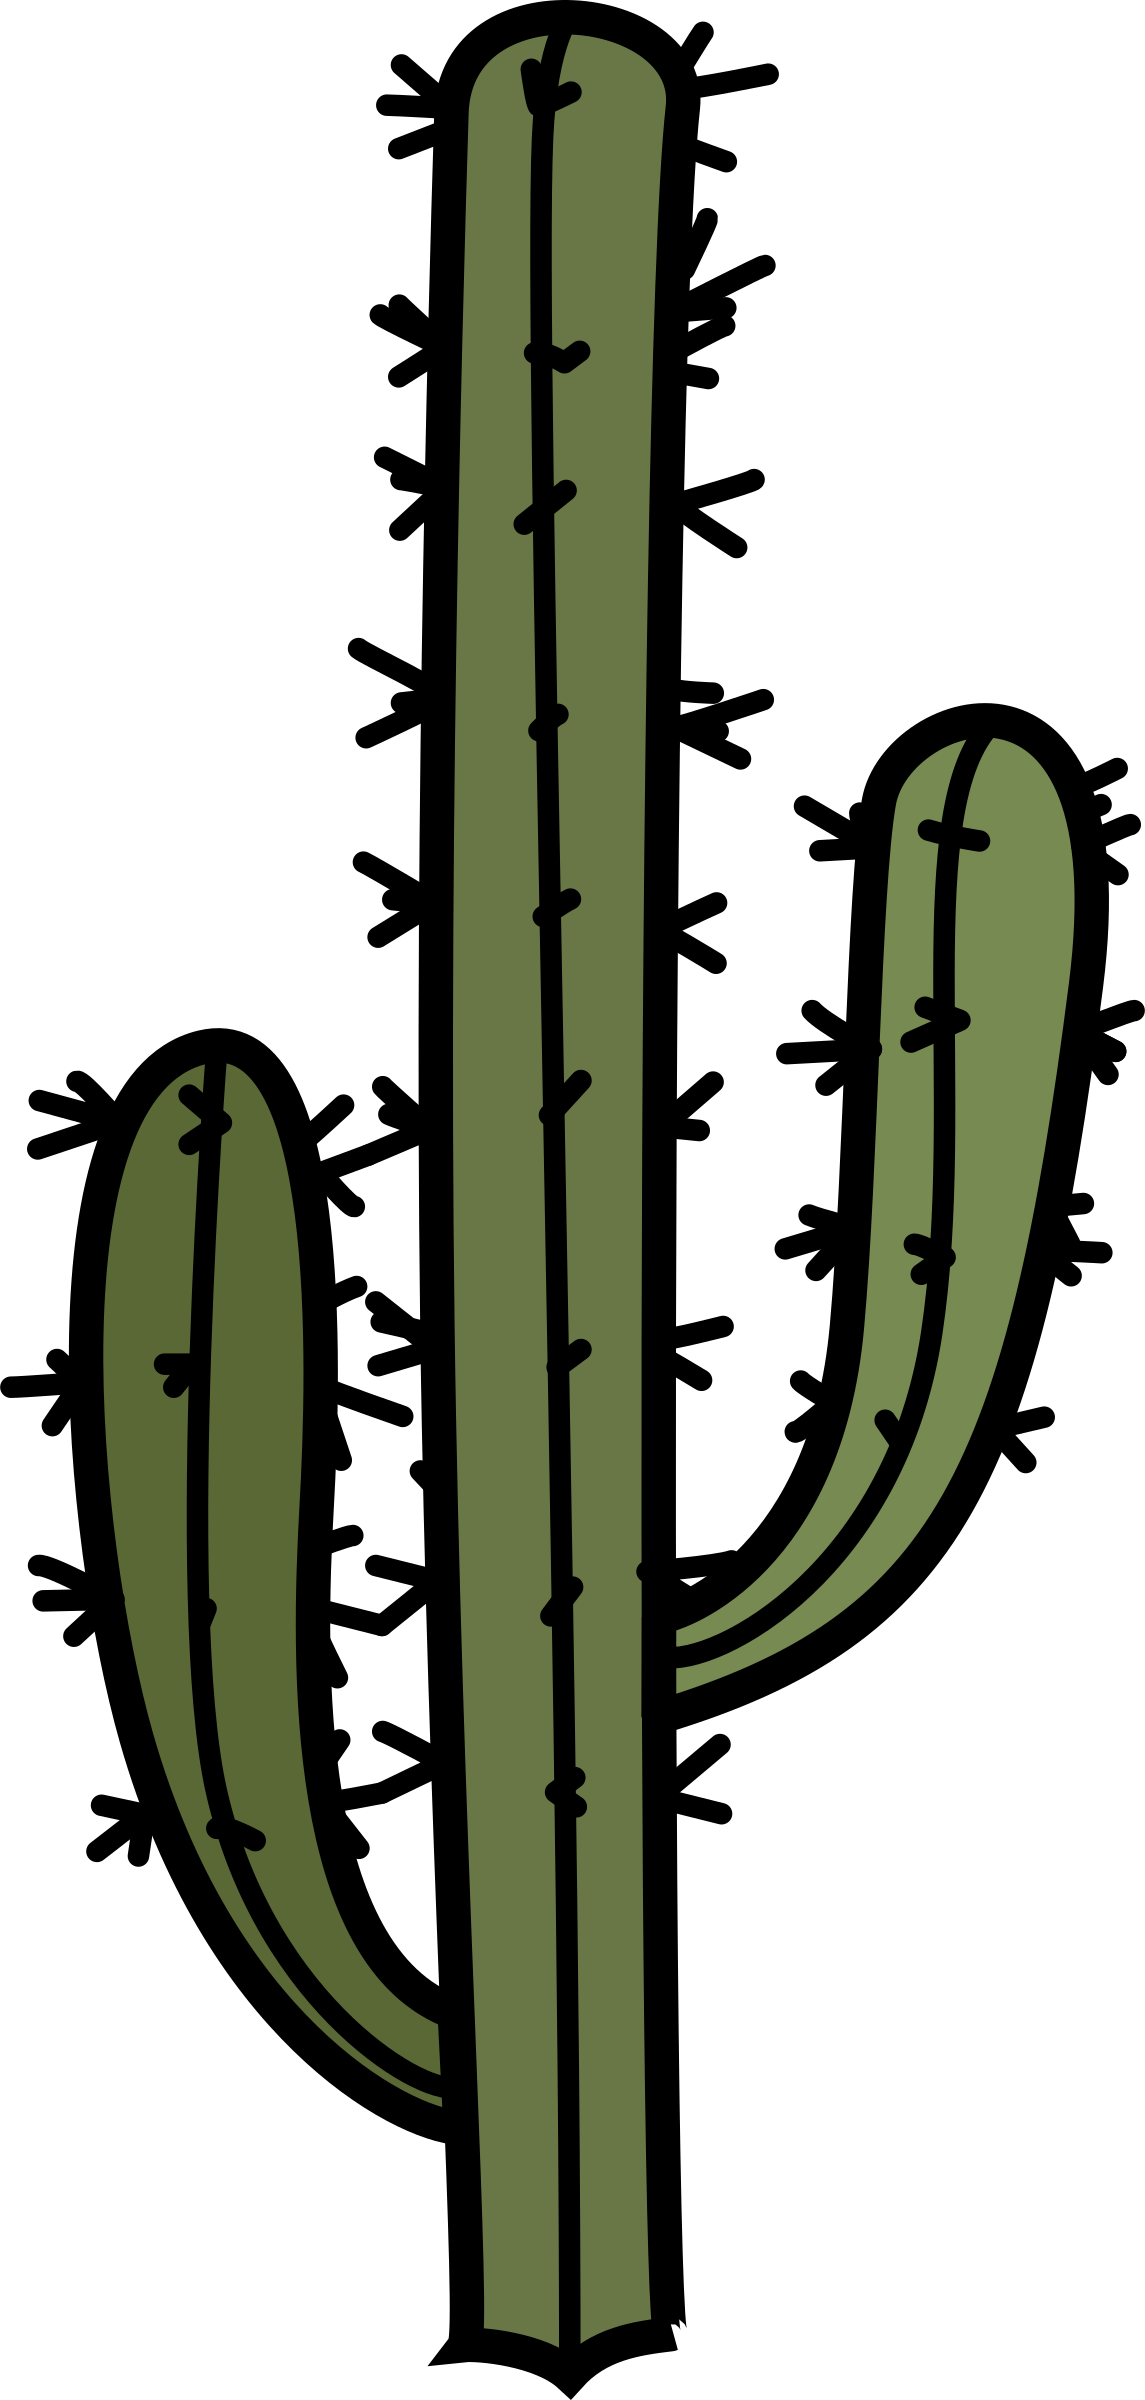 Cactus With Arms - Portable Network Graphics (1145x2400)